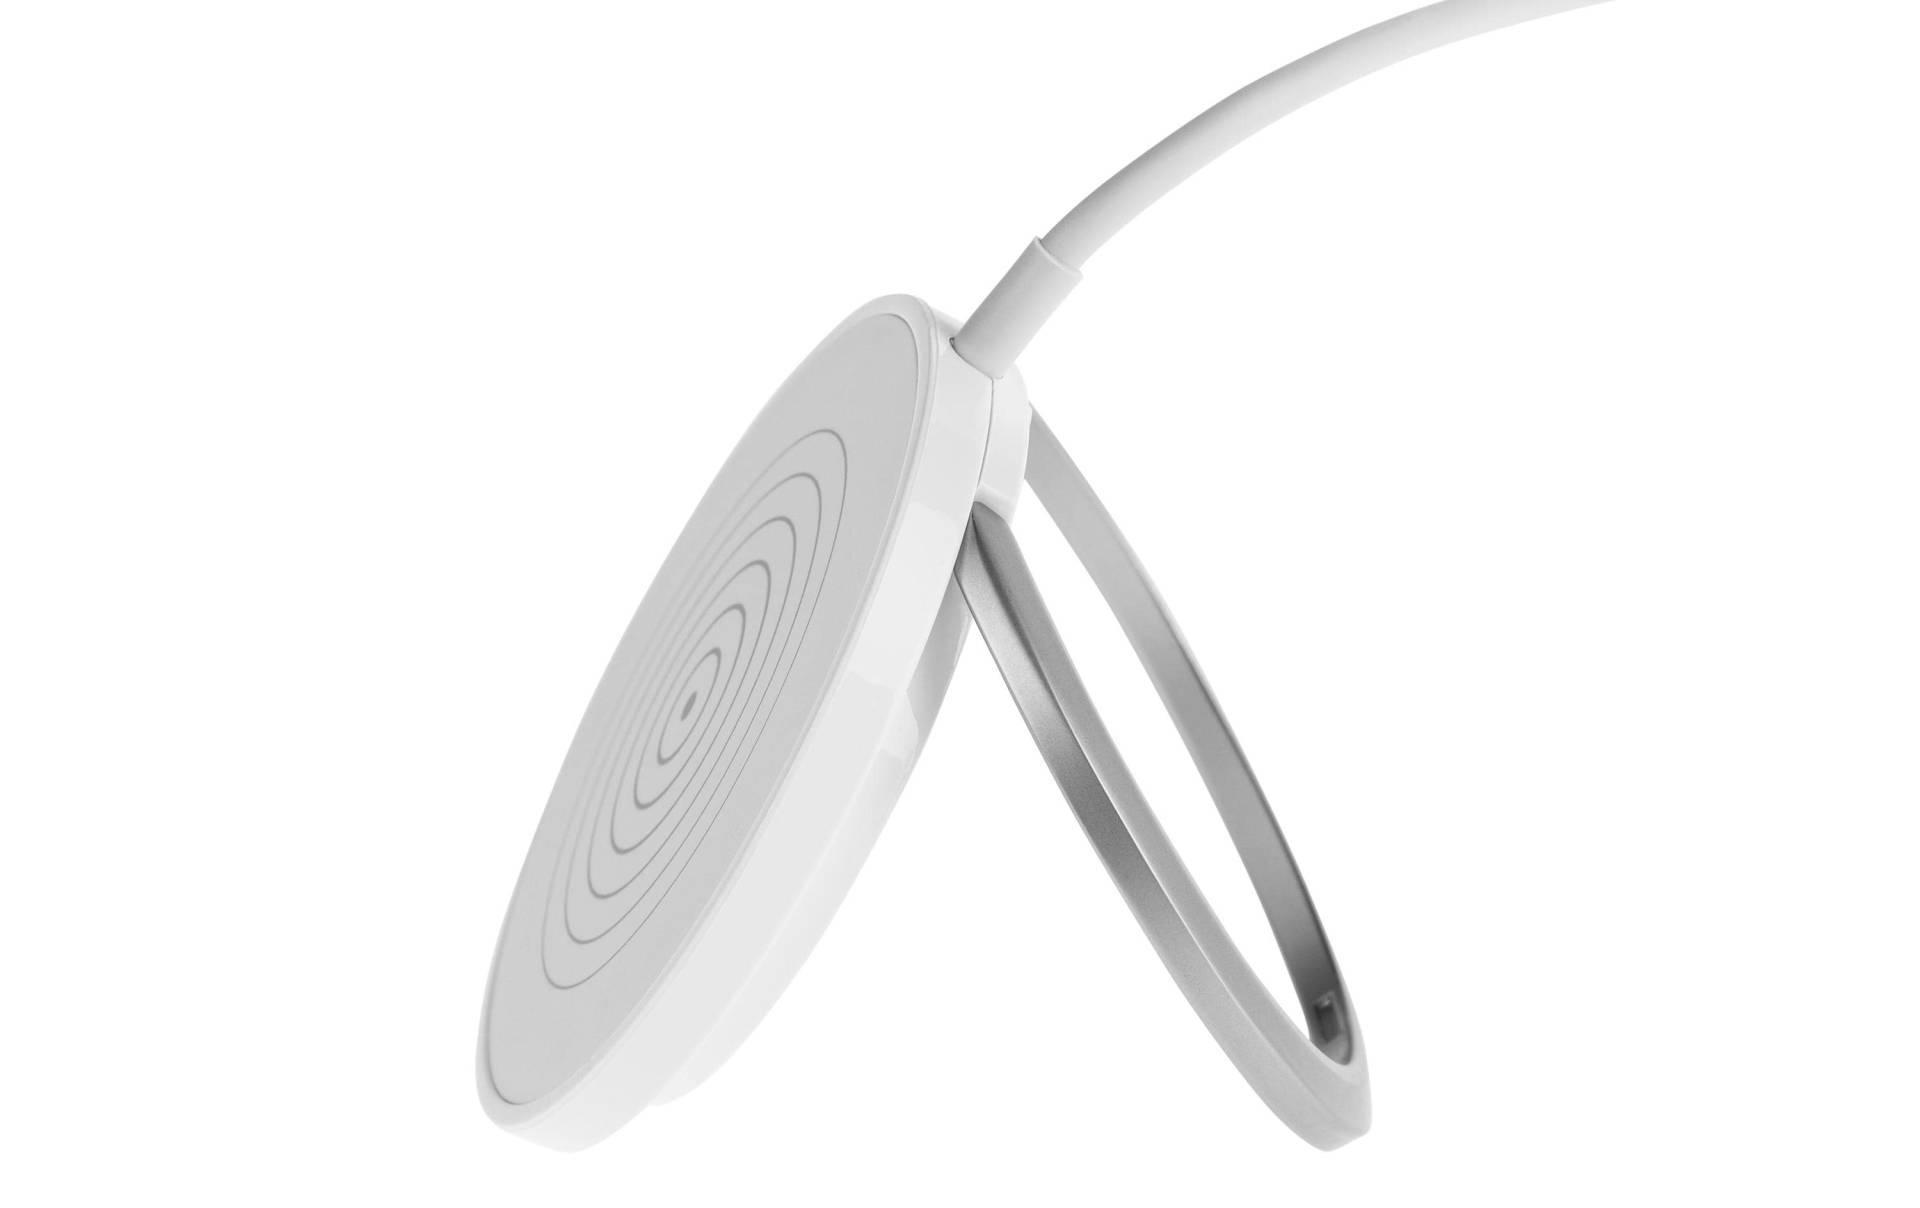 onit Wireless Charger »Charger 15 W Weiss« von onit